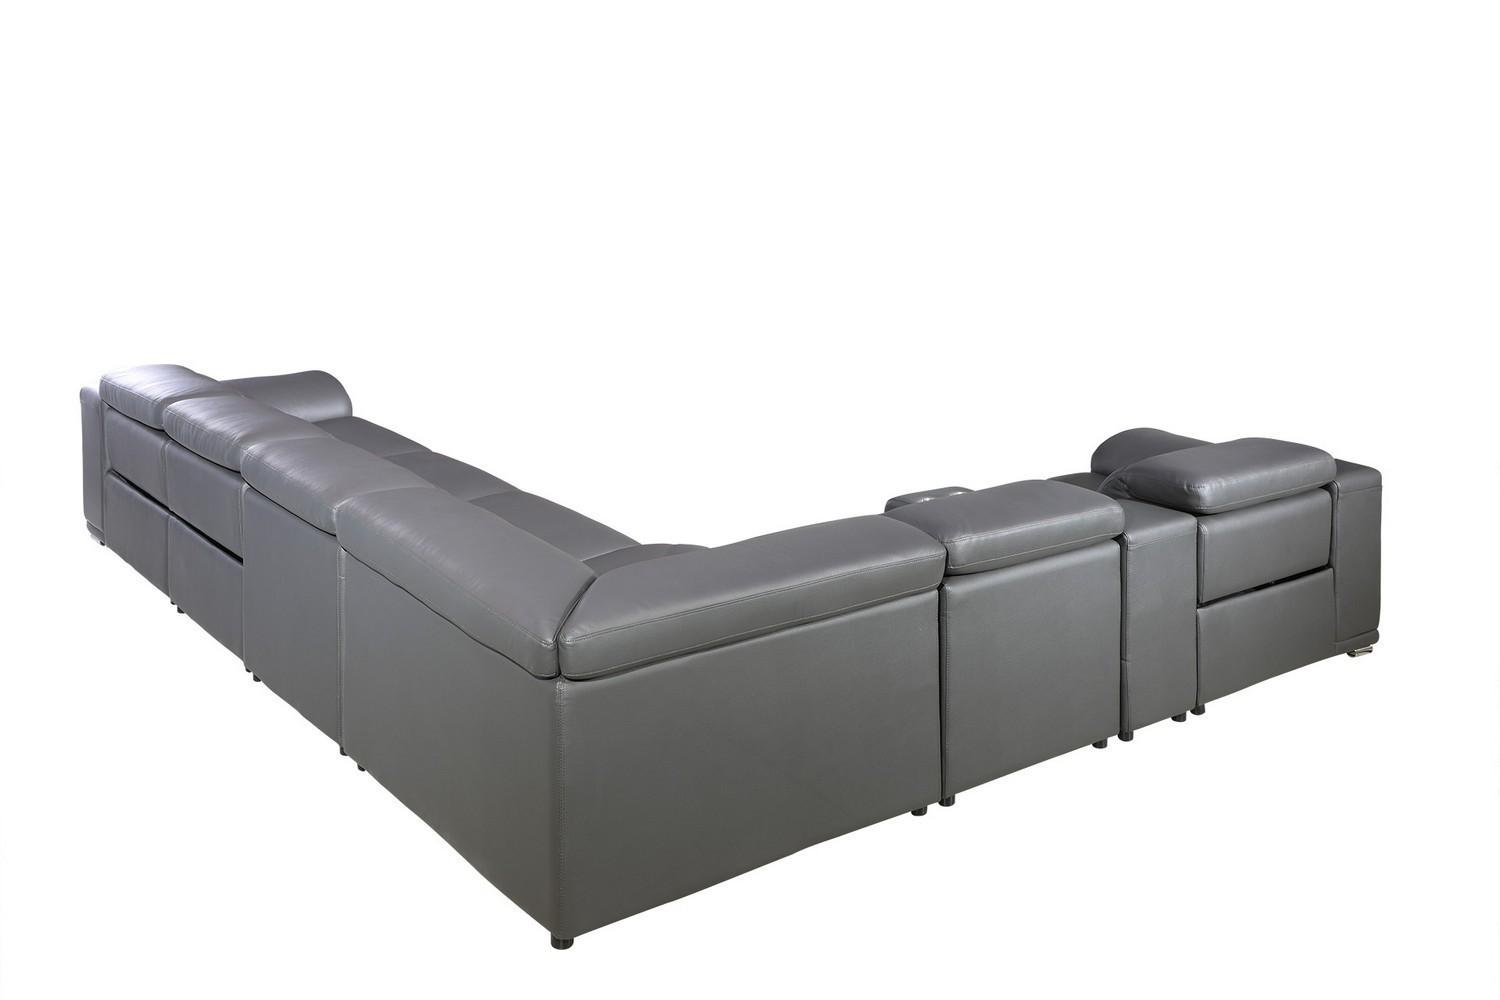 

    
9762-GRAY-4PWR-7PC DARK GREY 4-Power Reclining 7PC Sectional w/ 1-Console 9762 Global United
